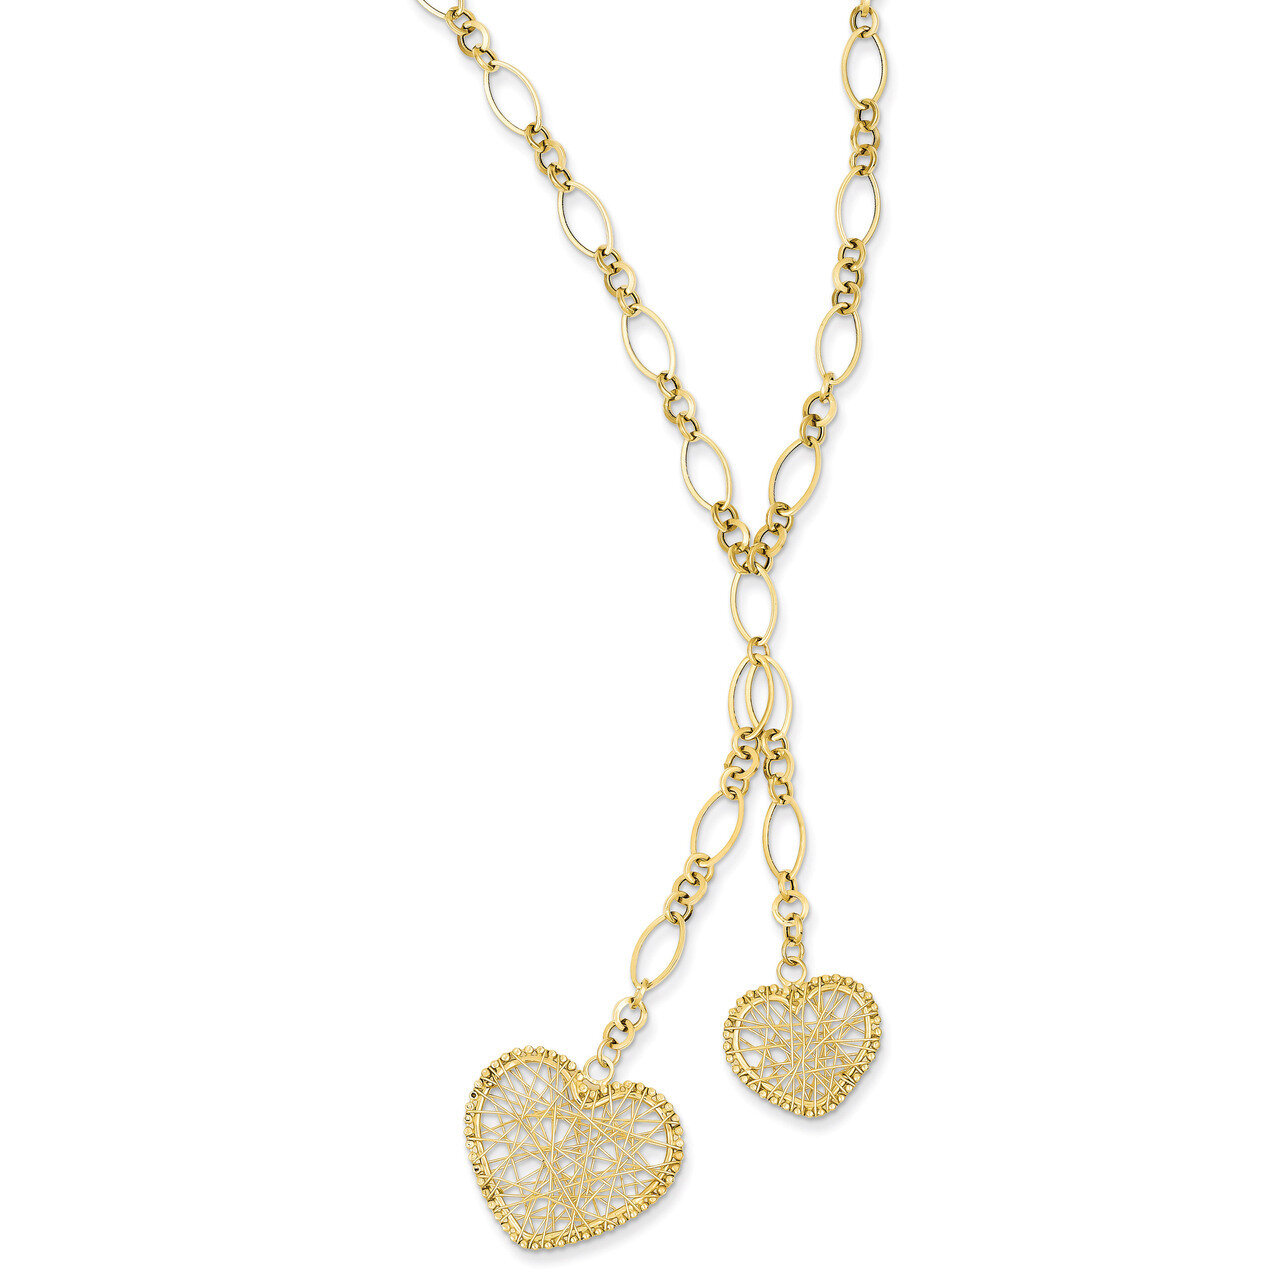 Adjustable Heart Drop Necklace 16 Inch 14k Gold SF1720-16